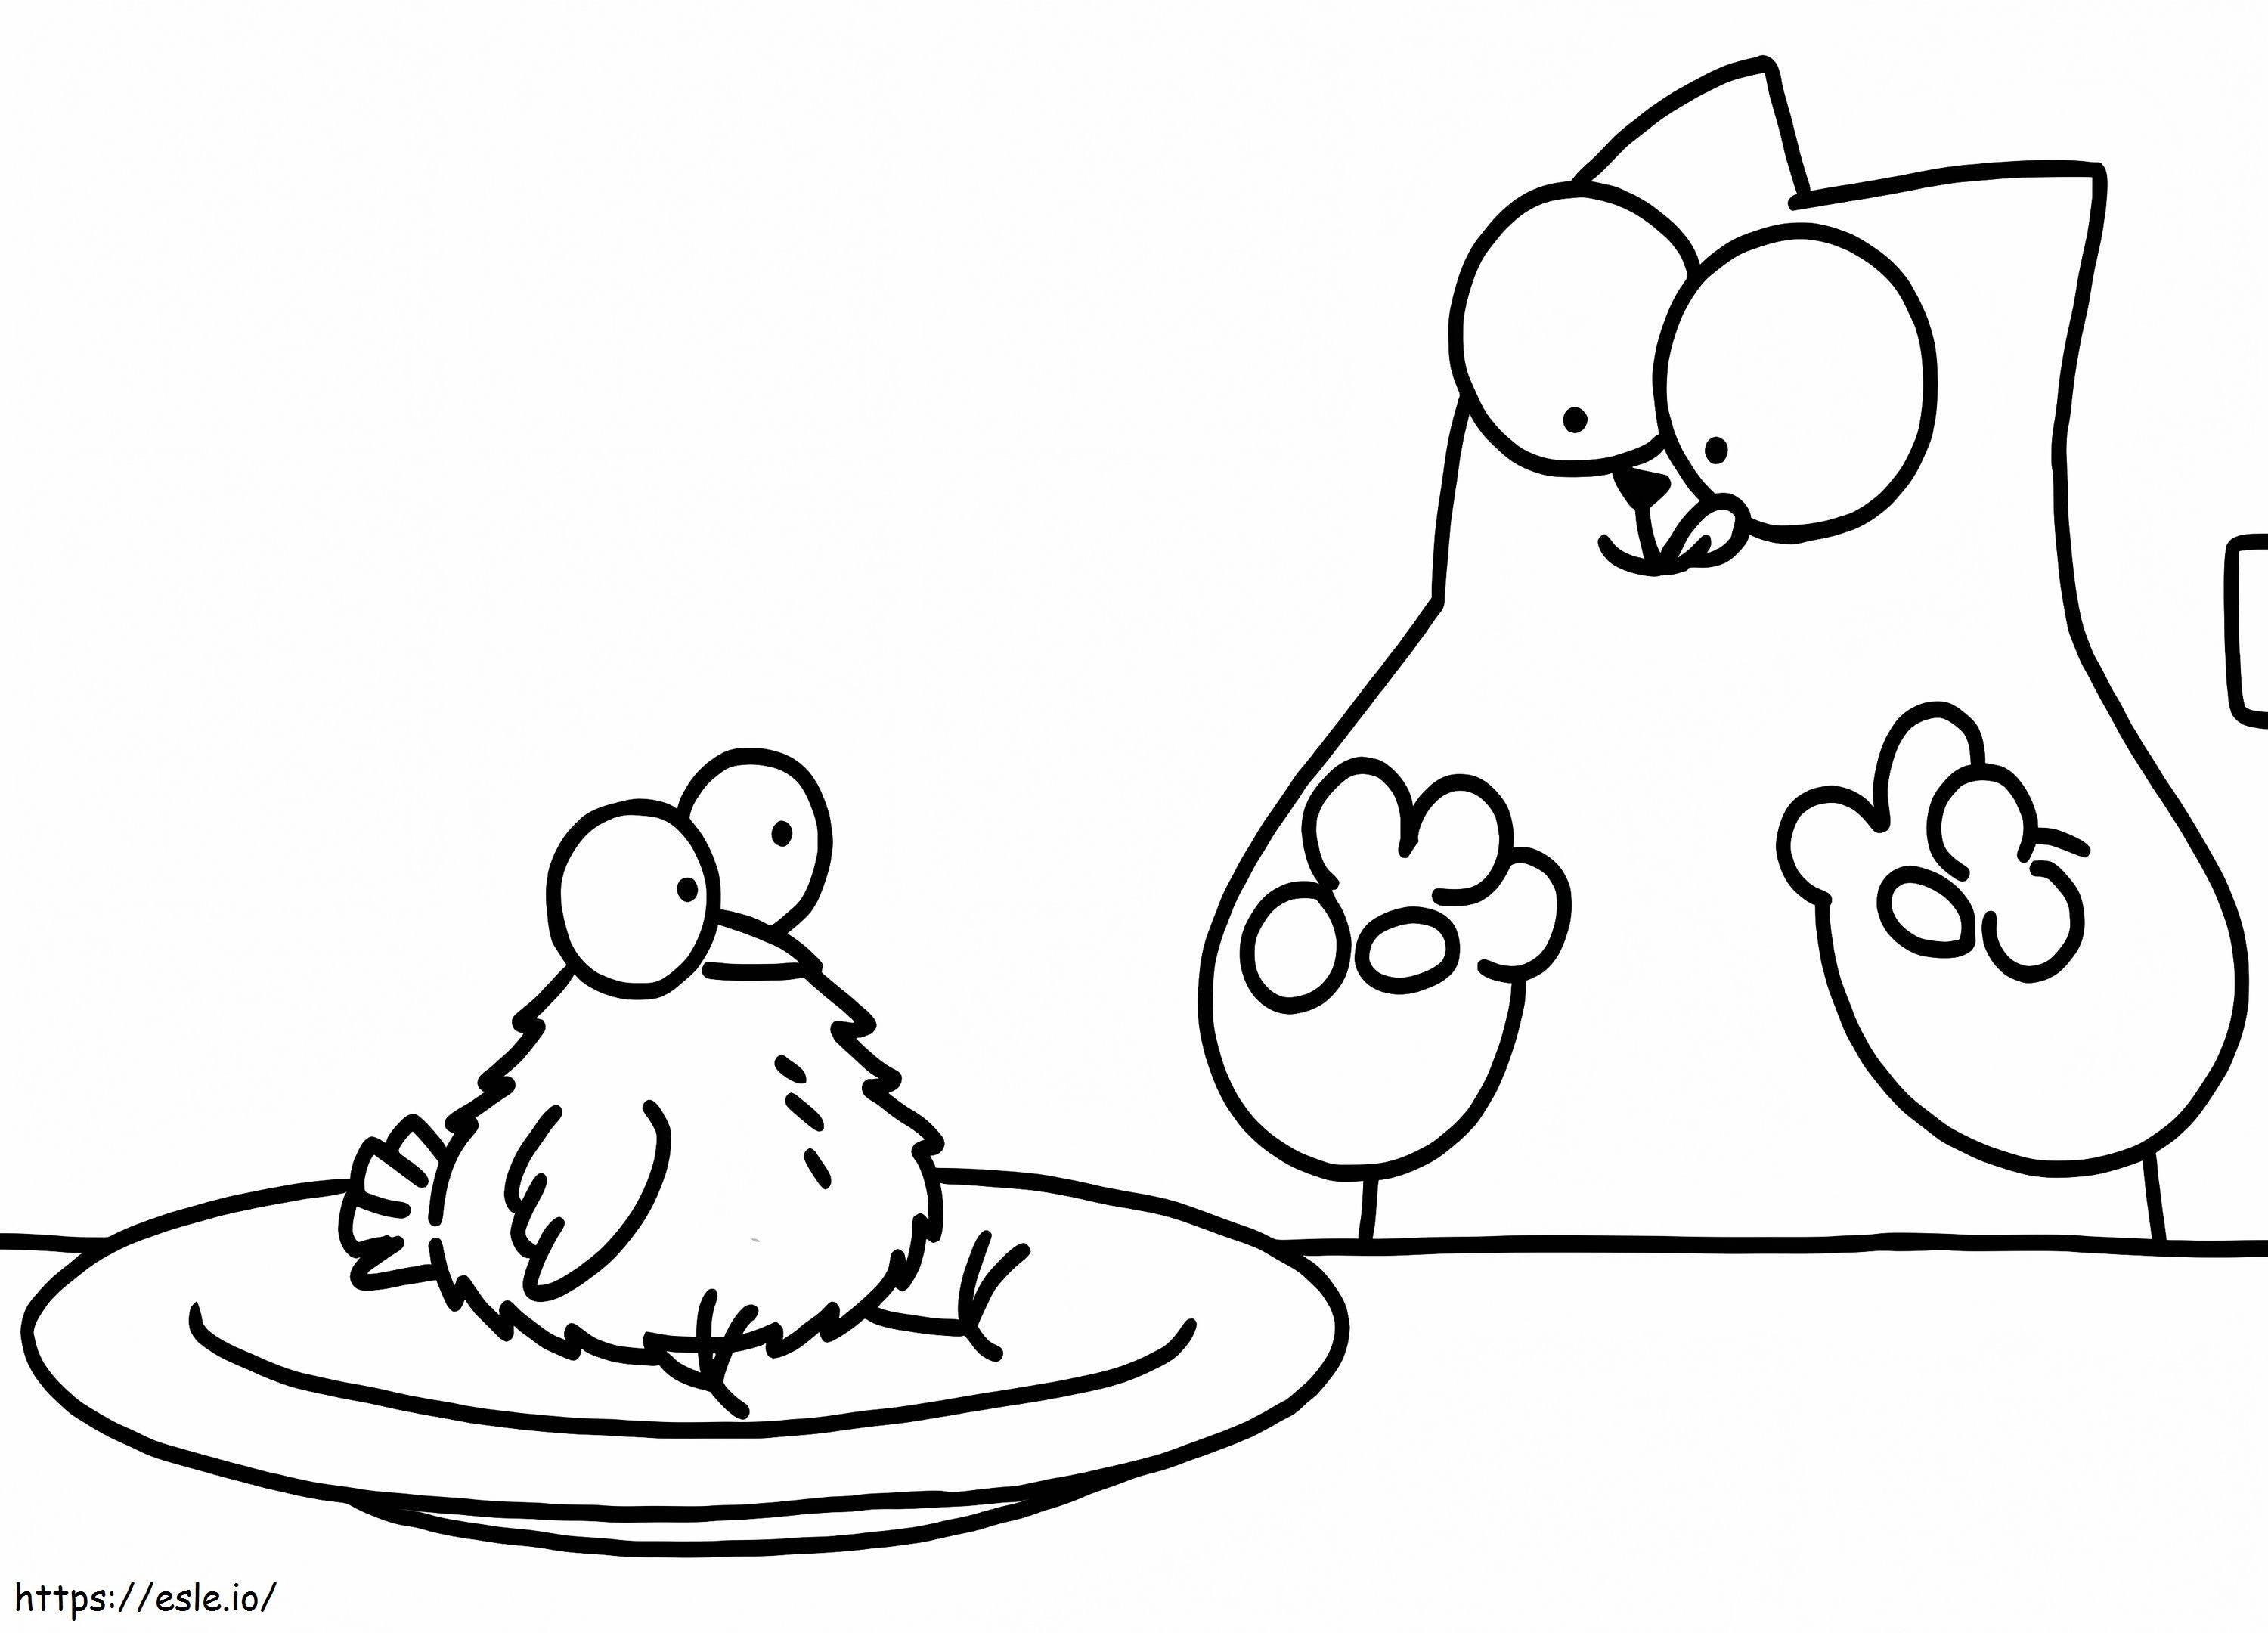 Simons Cat And A Bird coloring page